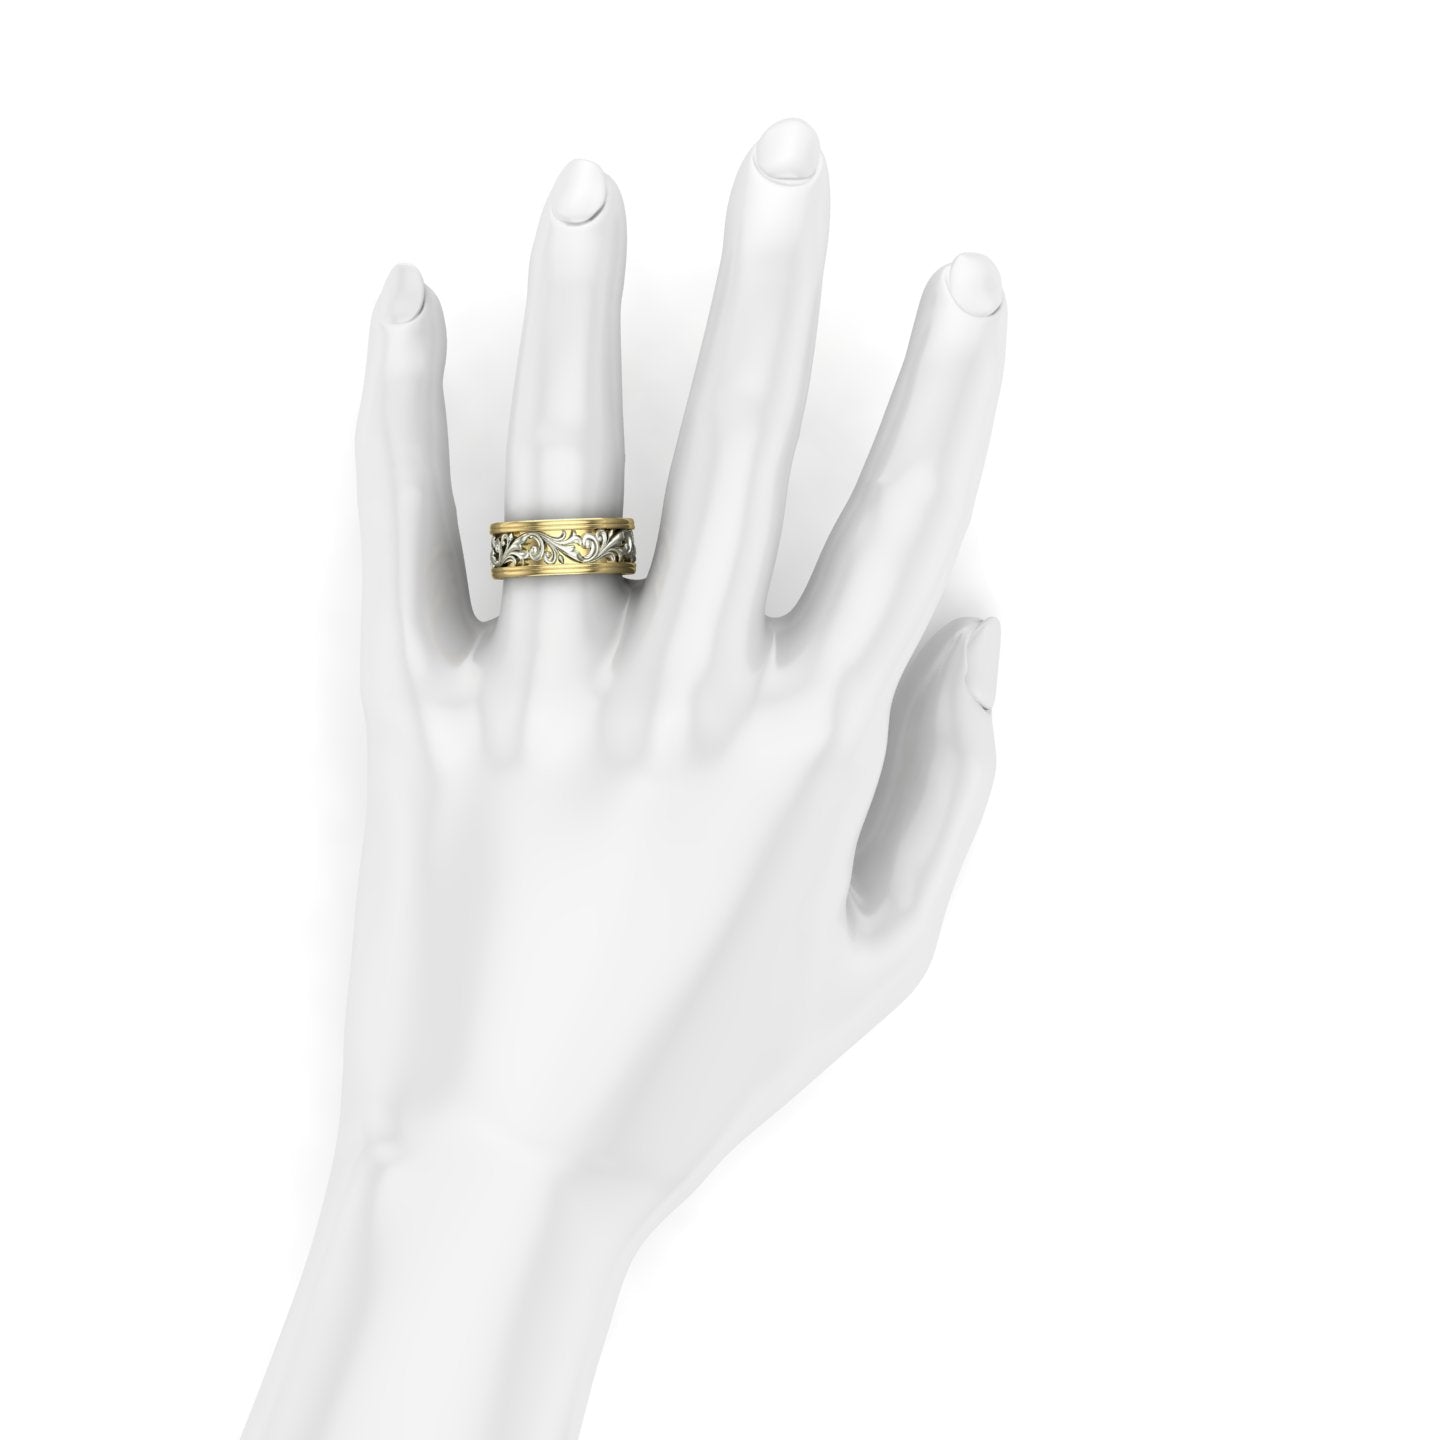 ladies wide two tone scroll wedding band in 14k yellow and white gold - Charles Babb Designs - on hand